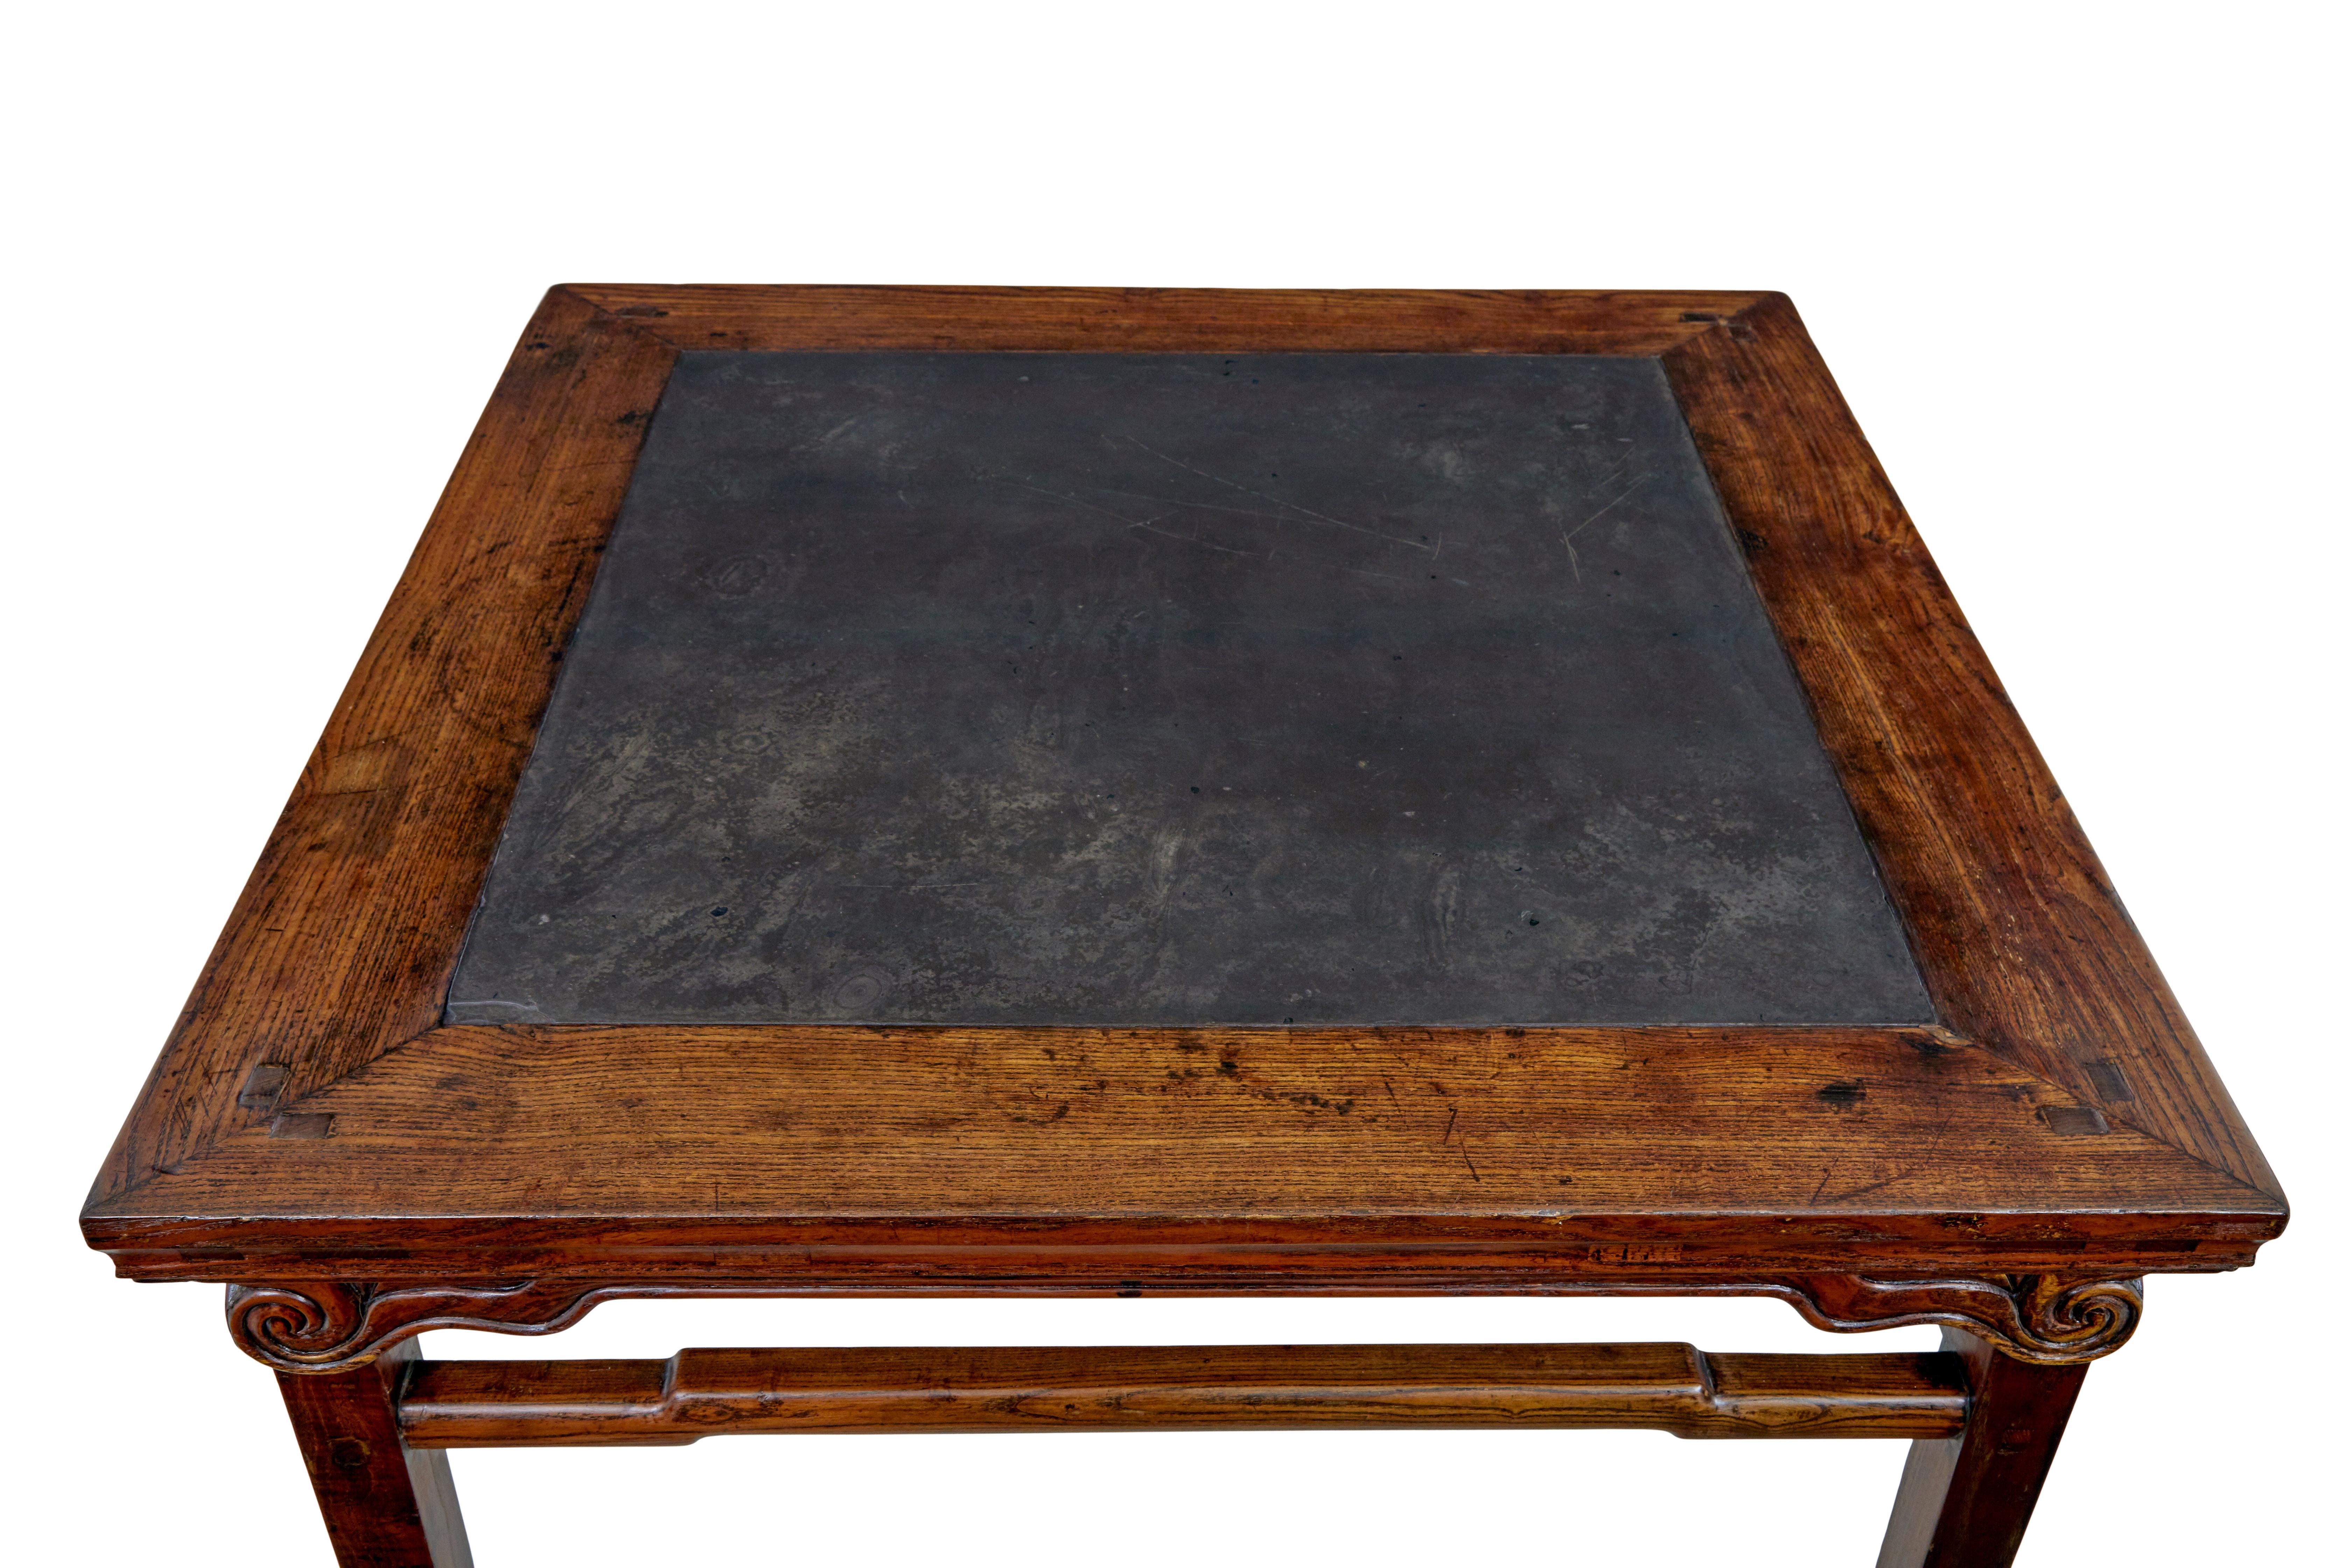 Large 19th century Chinese hard wood marble inset table circa 1880.

Good quality hard wood Chinese table with a dark grey marble panel inset into the top.  Marble has a great patina and natural finish to the surface.  Square top with carved scrolls